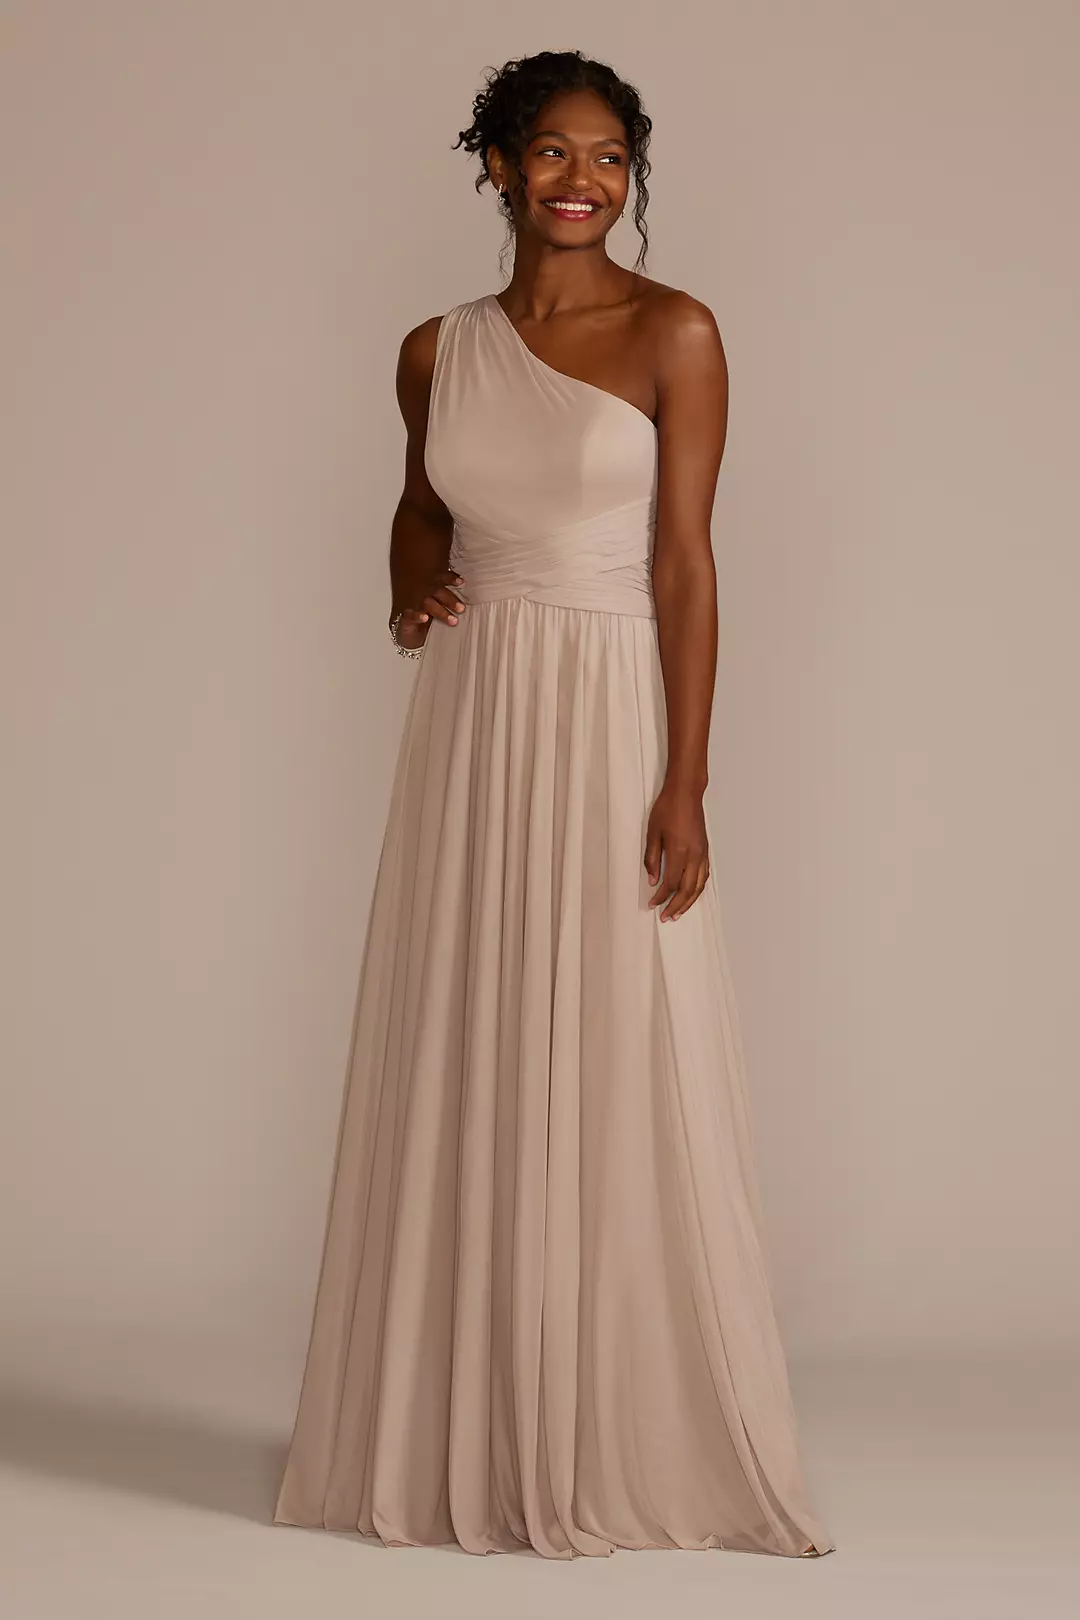 Mesh One-Shoulder Bridesmaid Dress with Full Skirt Image